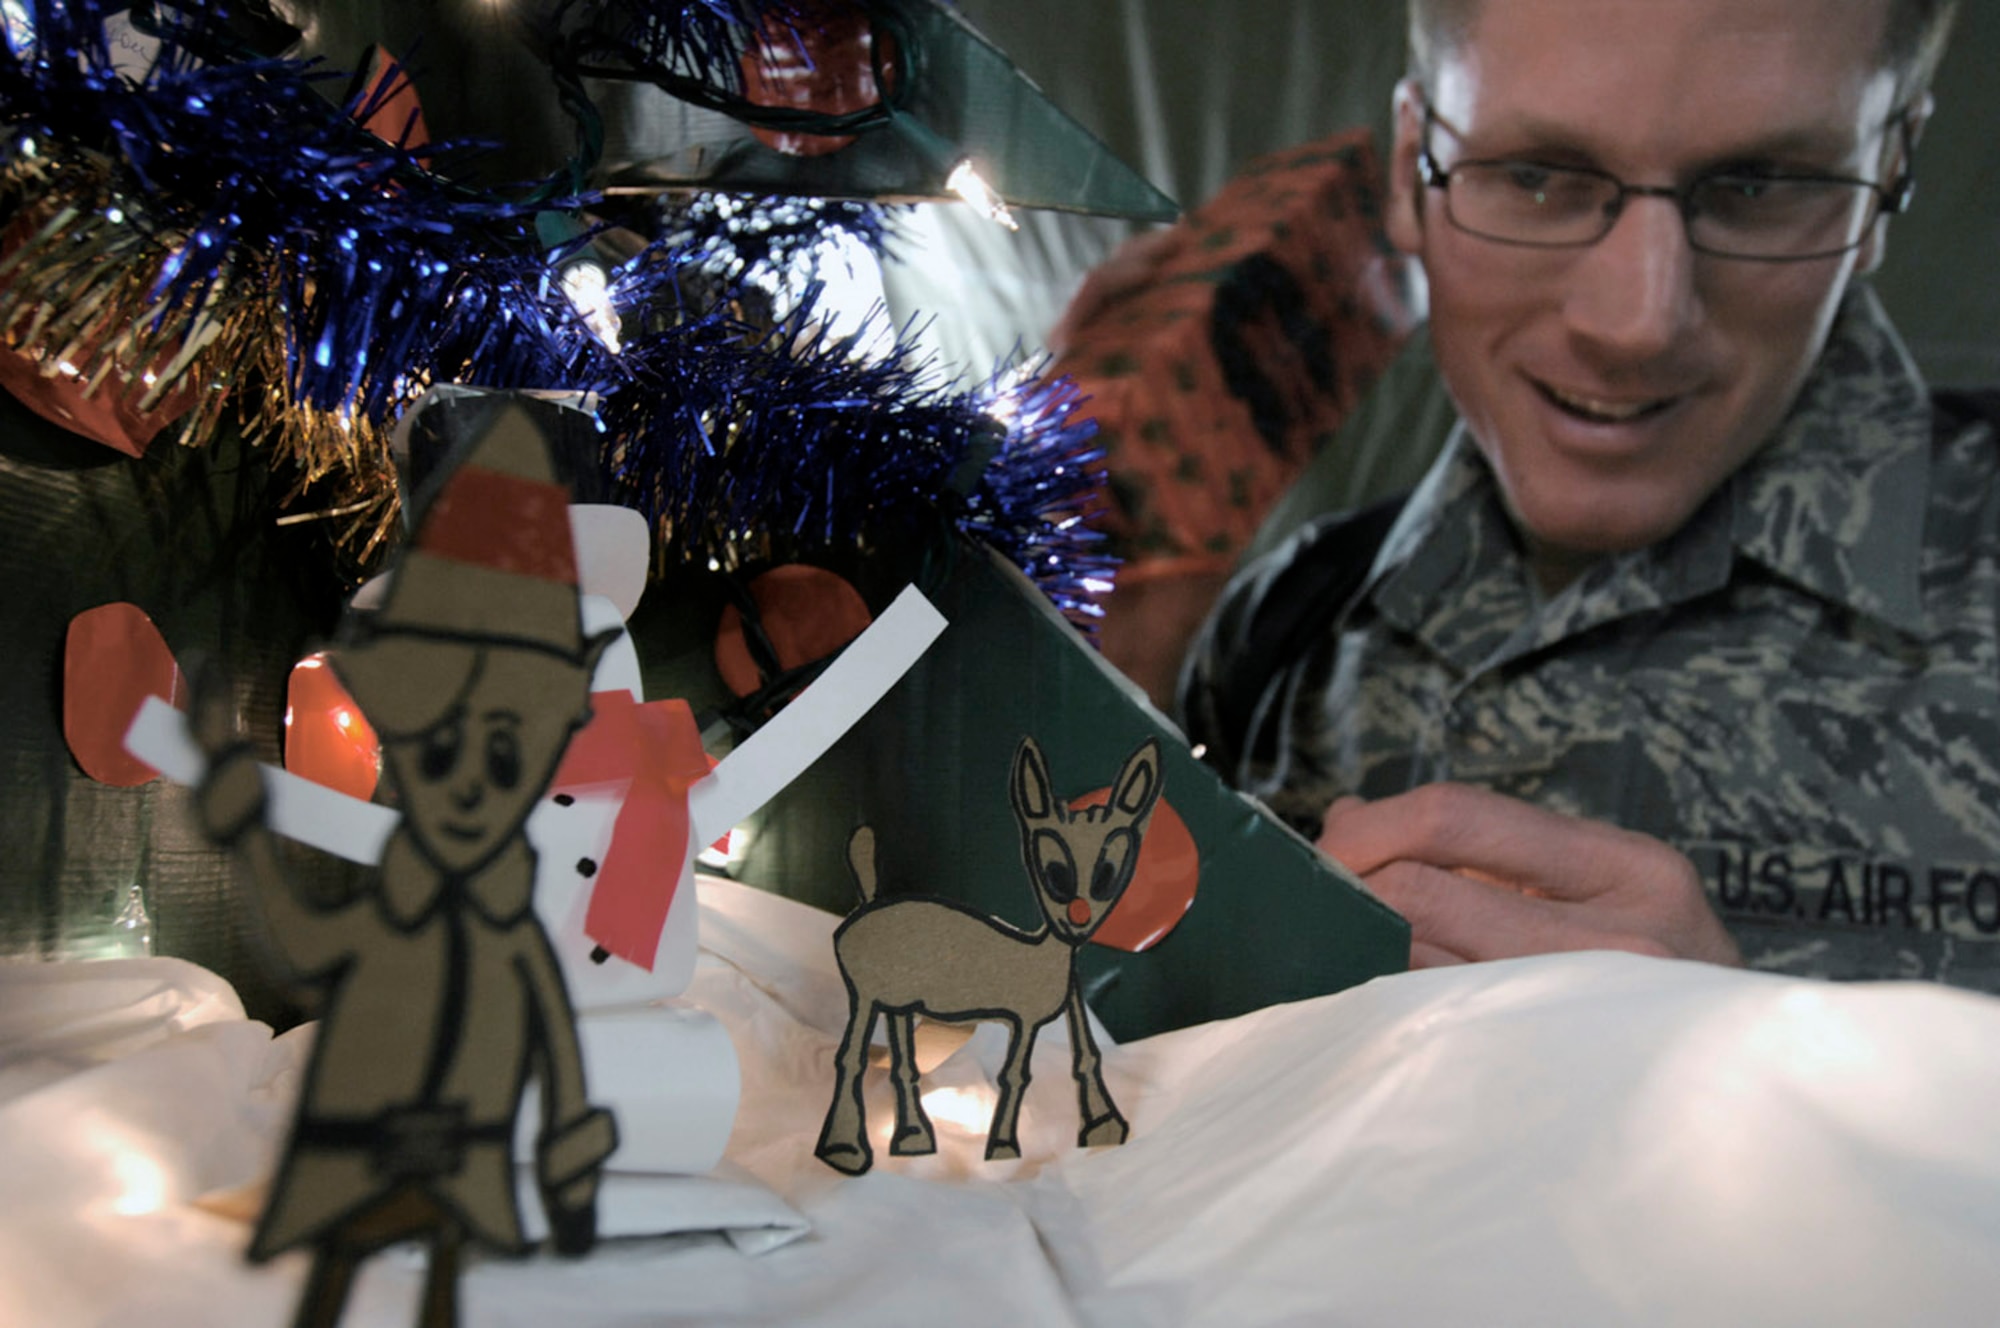 Tech. Sgt. Ryan McMaster looks at cartoon characters he created in a holiday diorama made from locally-procured materials Dec. 14 at Bagram Air Base, Afghanistan. Sergeant McMaster is an aircrew life support technician with the 774th Expeditionary Airlift Squadron. (U.S. Air Force photo/Staff Sgt. Joshua T. Jasper)(